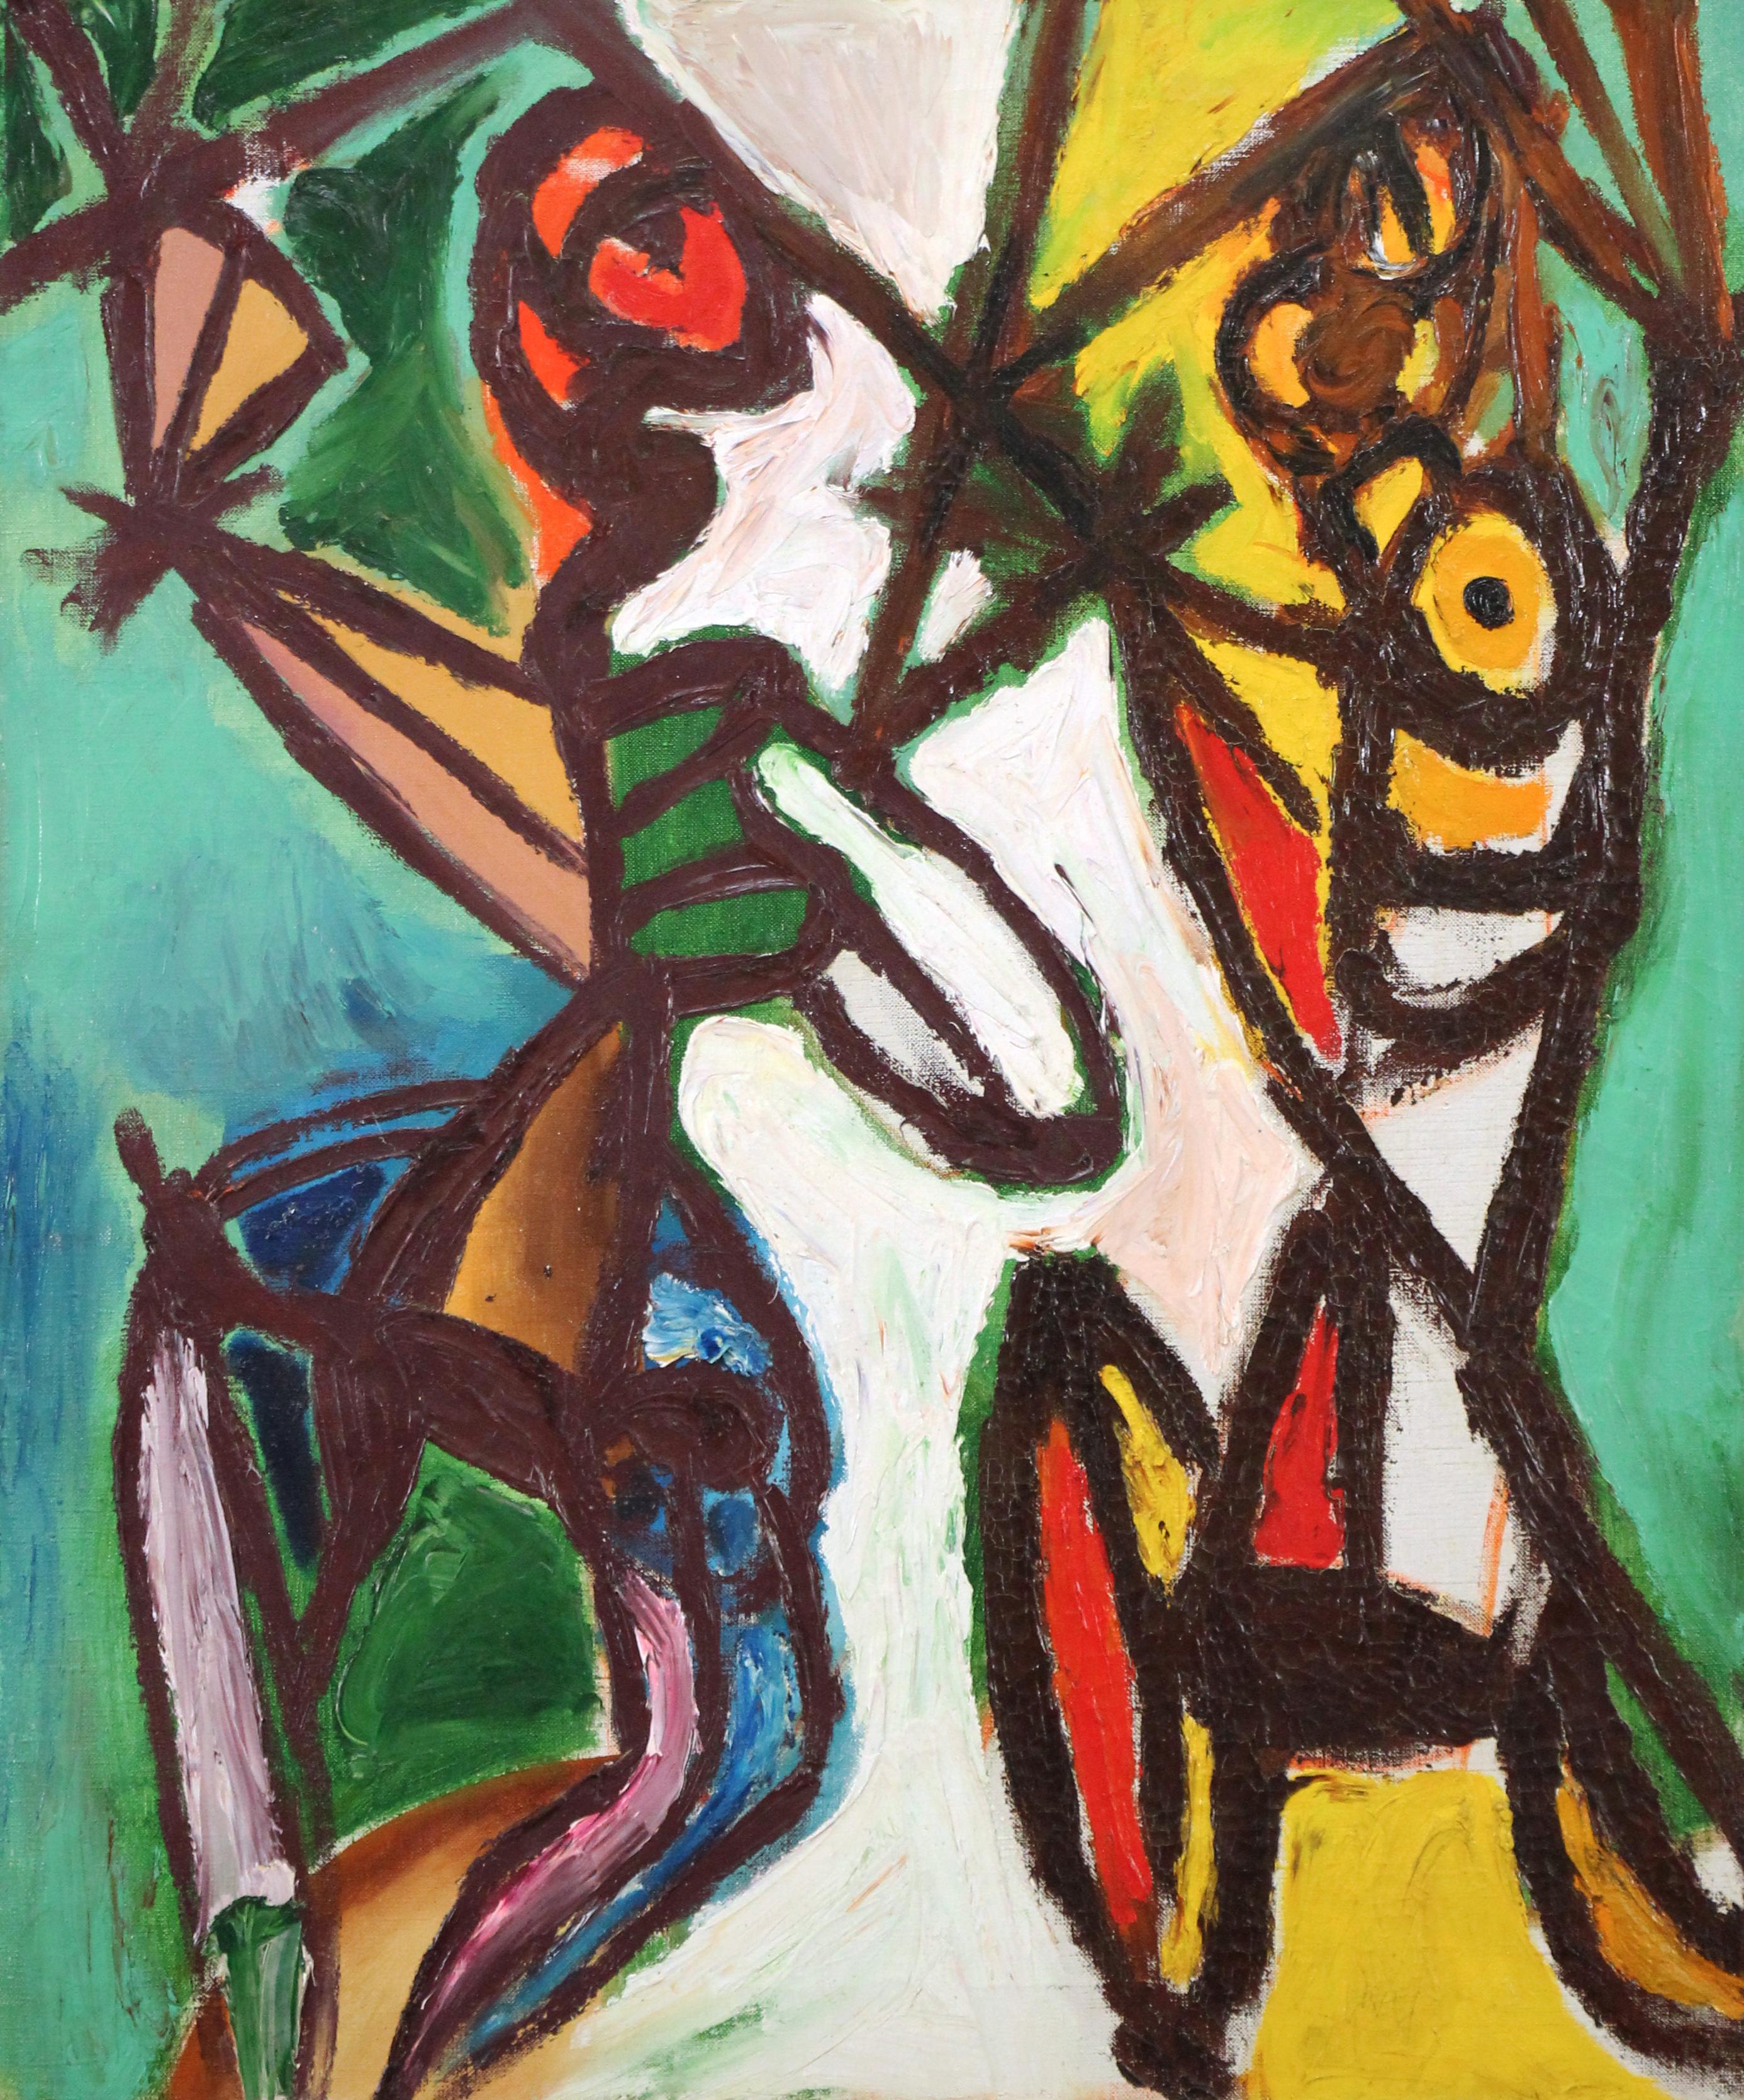 Dancers, Abstract and Figurative Painting by Female Modernist